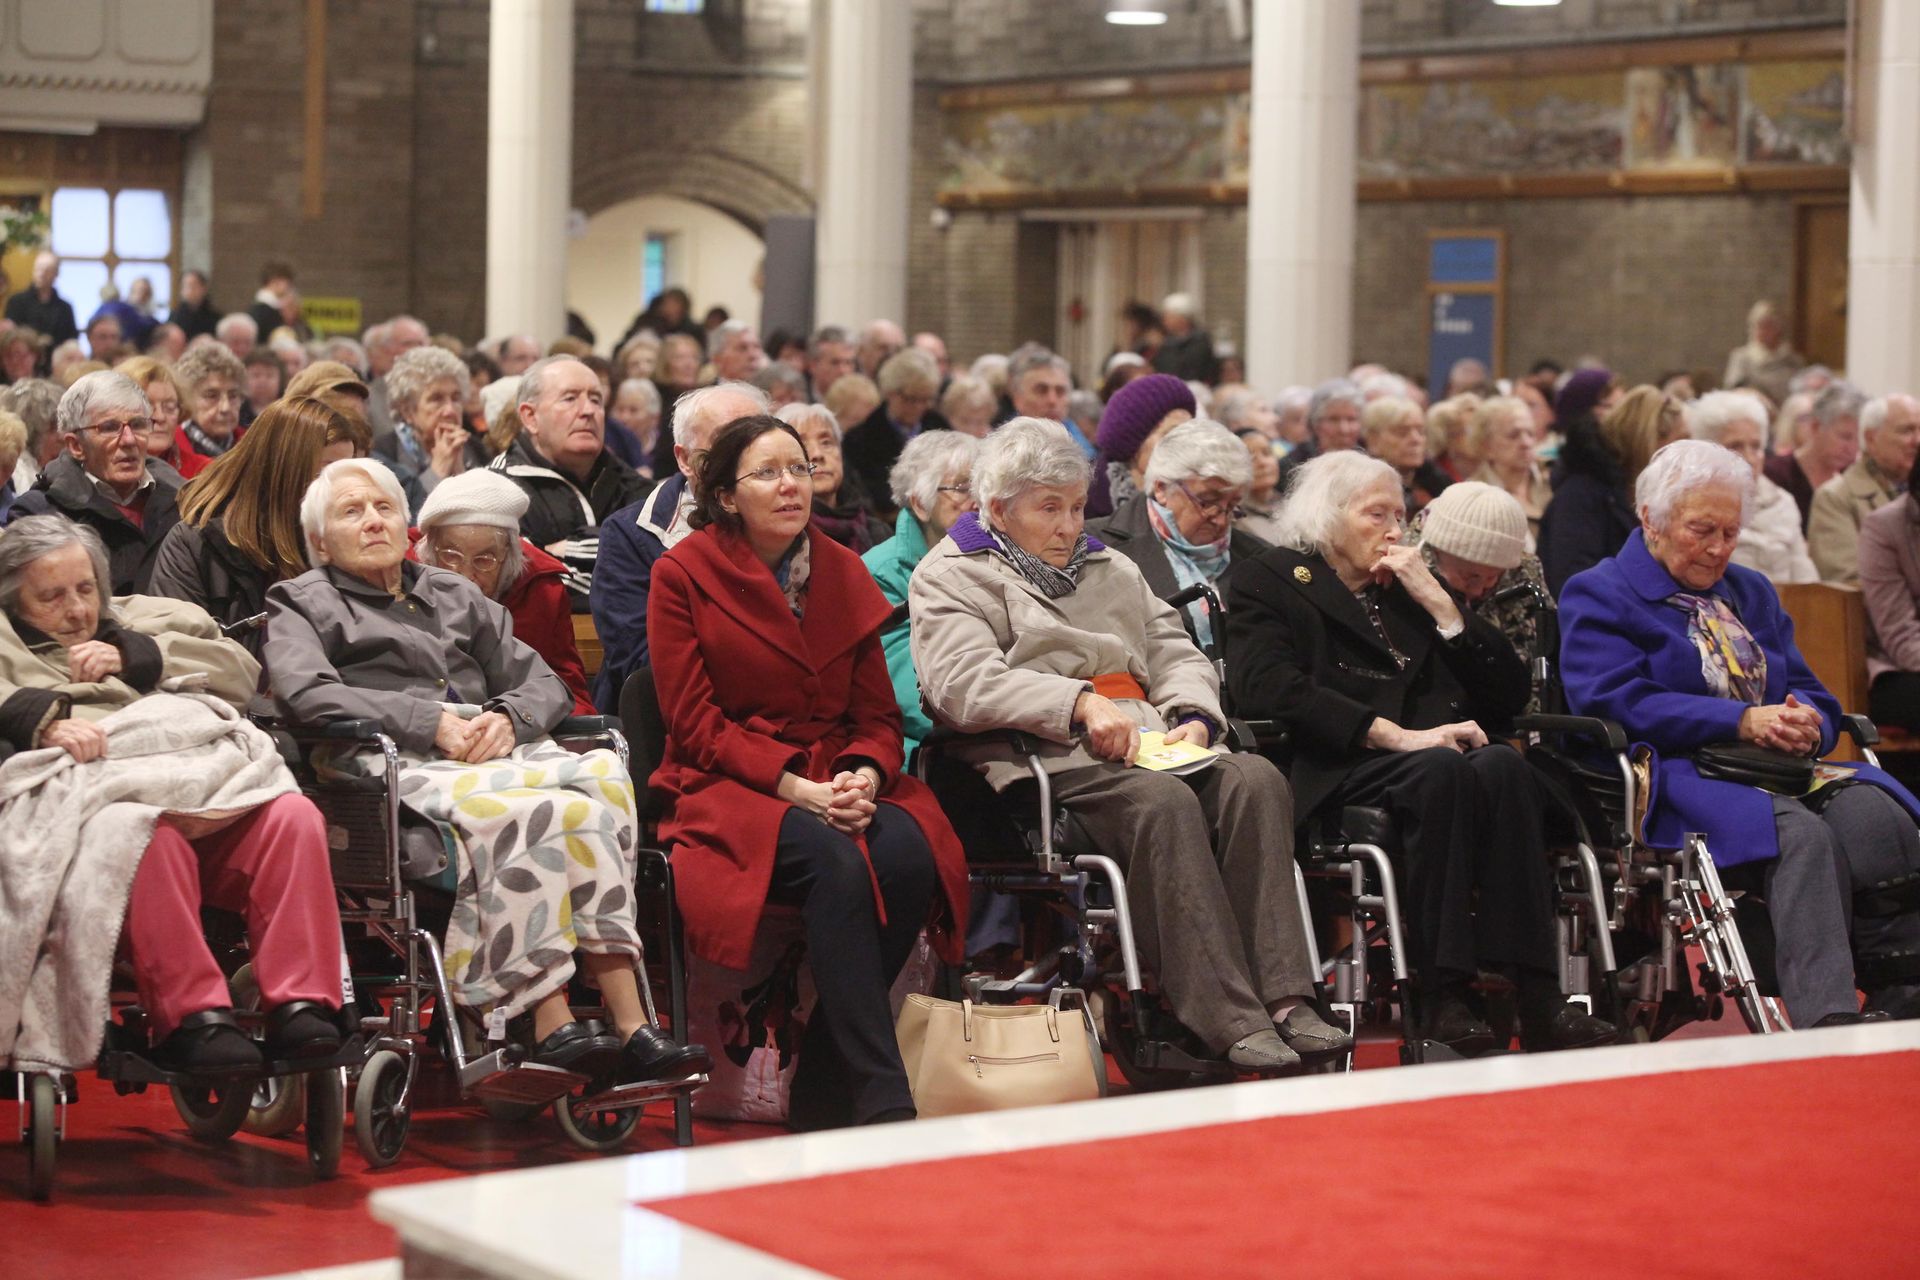 A large group of people in wheelchairs are sitting in a church.